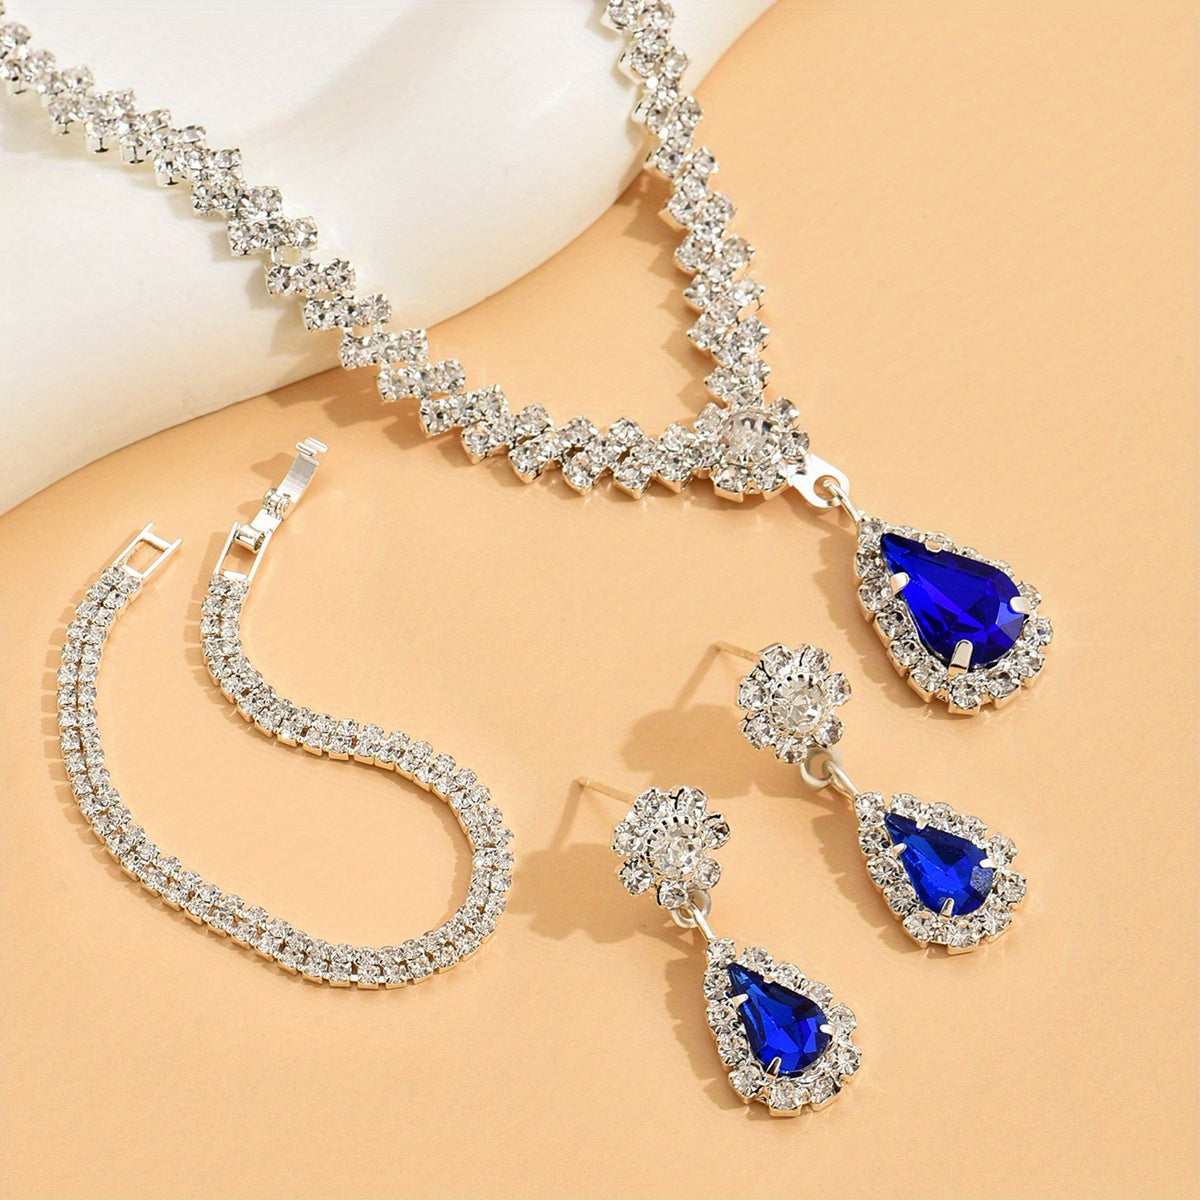 4pcs Earrings Necklace Bracelet Silver Plated Inlaid Shining Rhinestone Elegant Accessories For Female Dupes Luxury Decor For Evening Party Noble Chrismas Gift